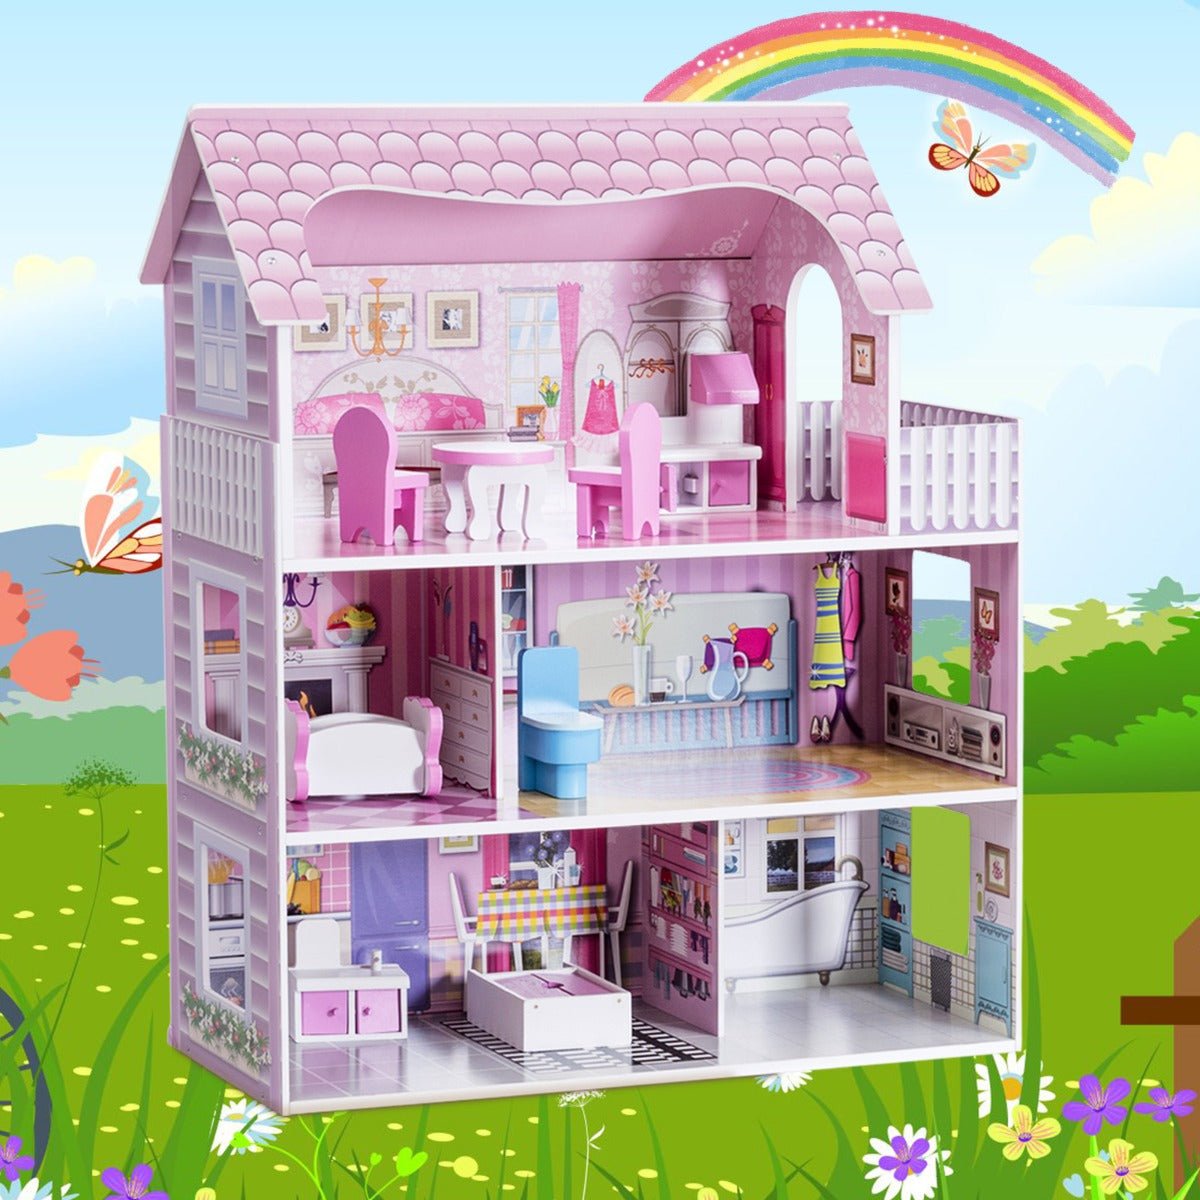 Explore Endless Adventures with a Wooden Dollhouse